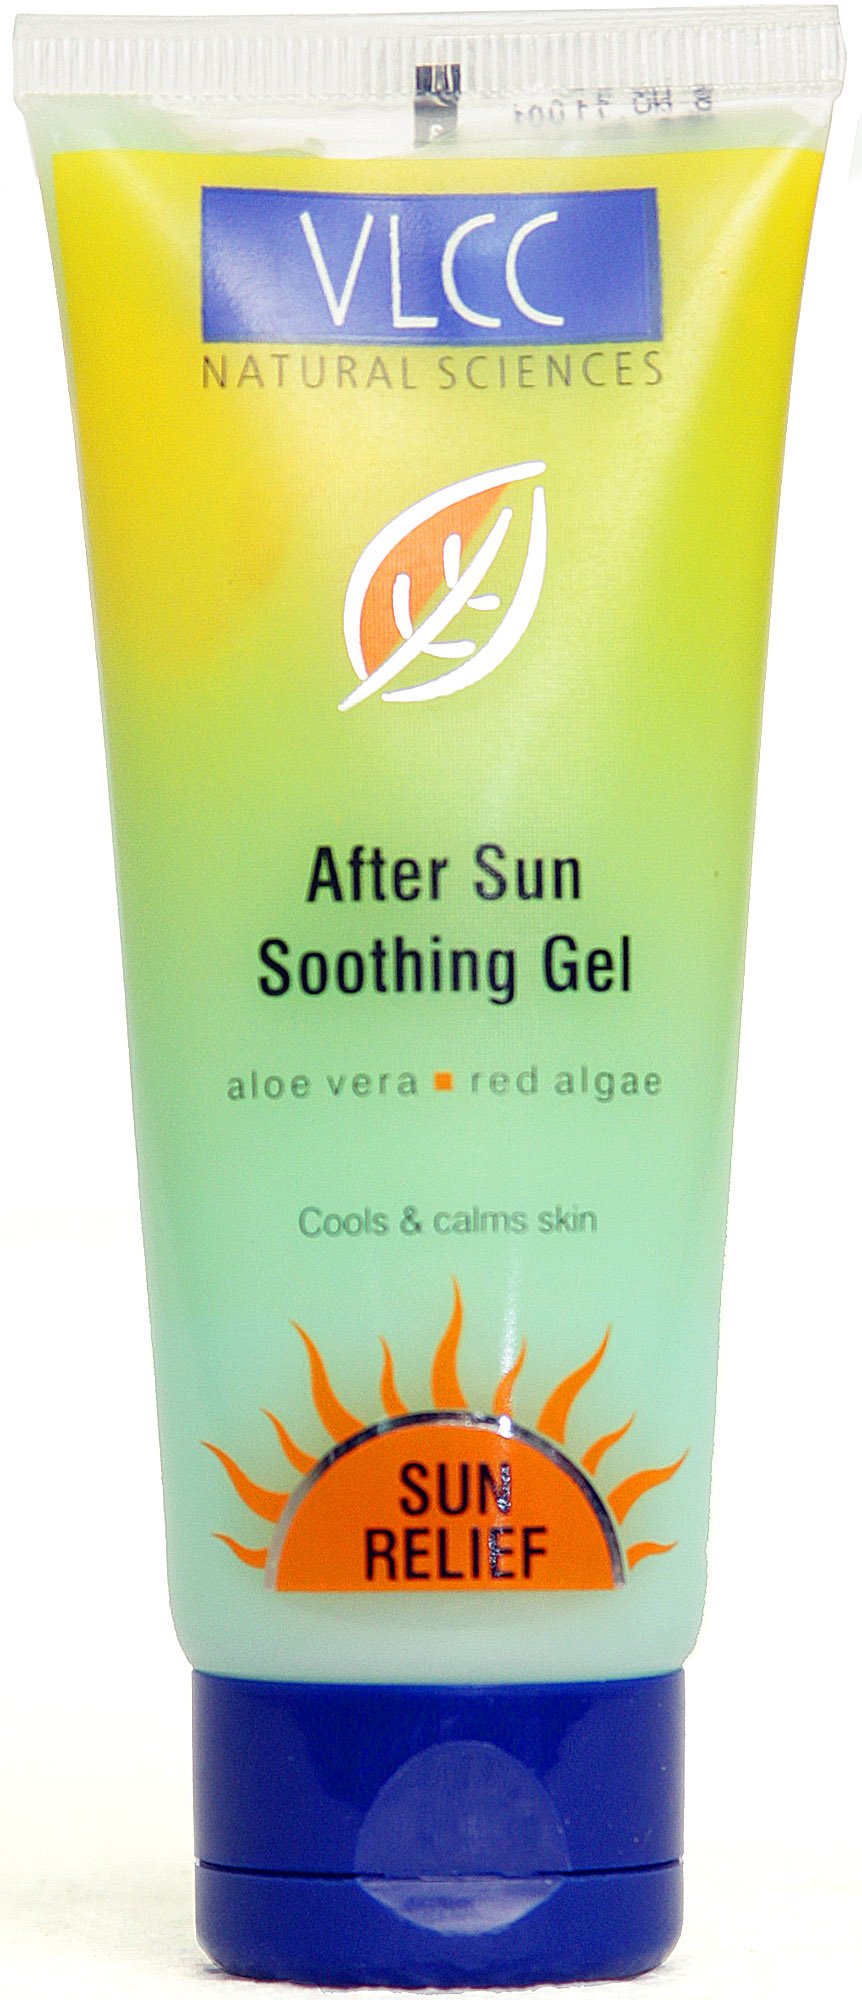 After Sun Soothing Gel - book cover